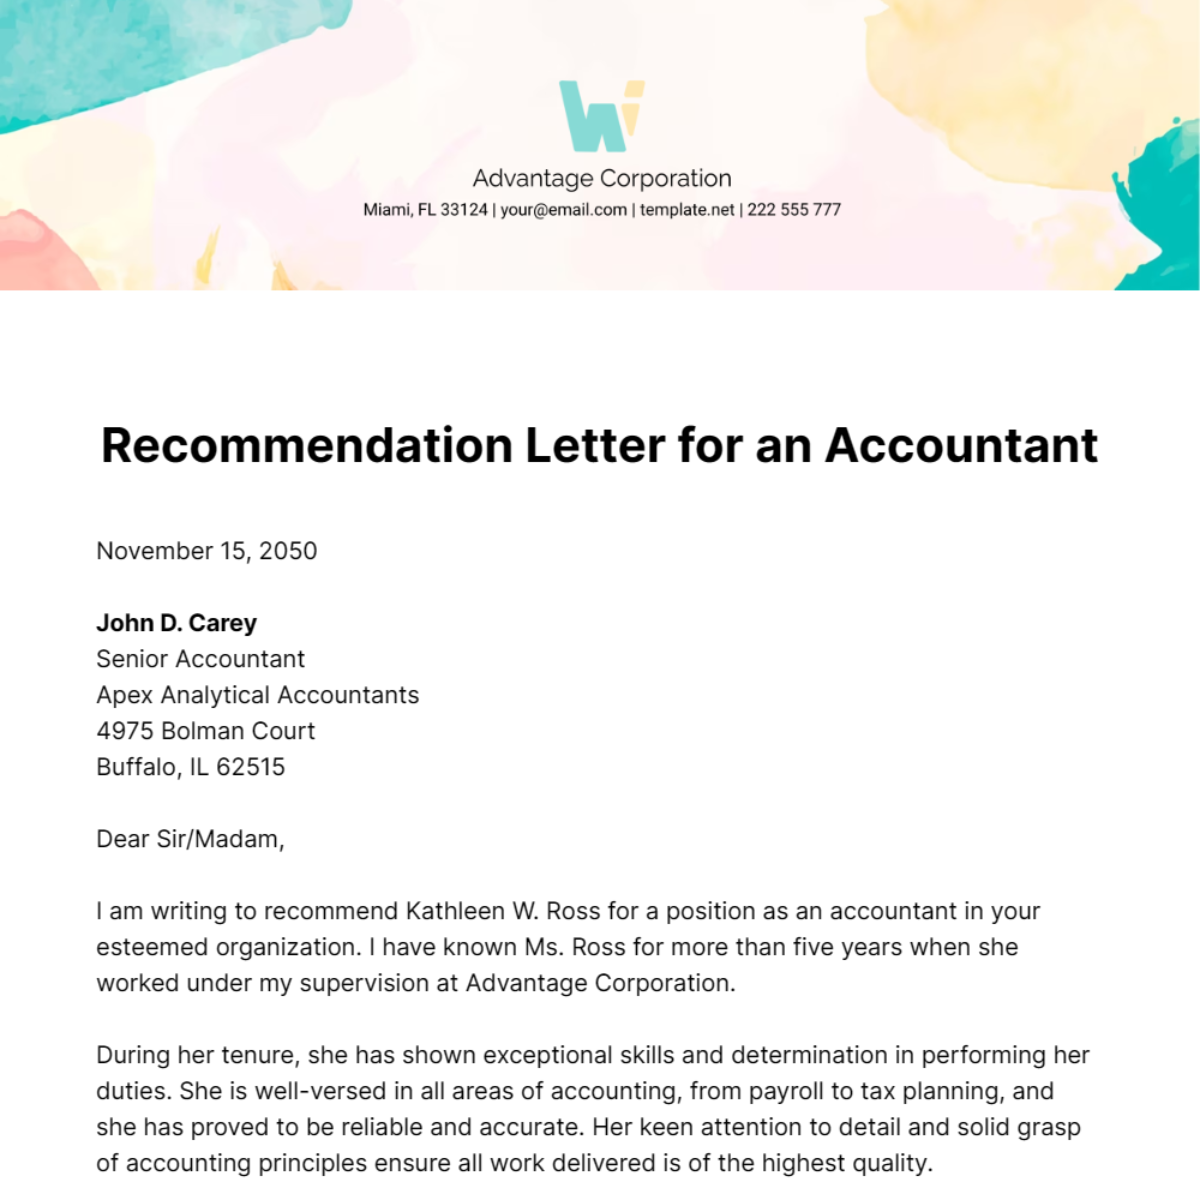 Recommendation Letter for an Accountant Template